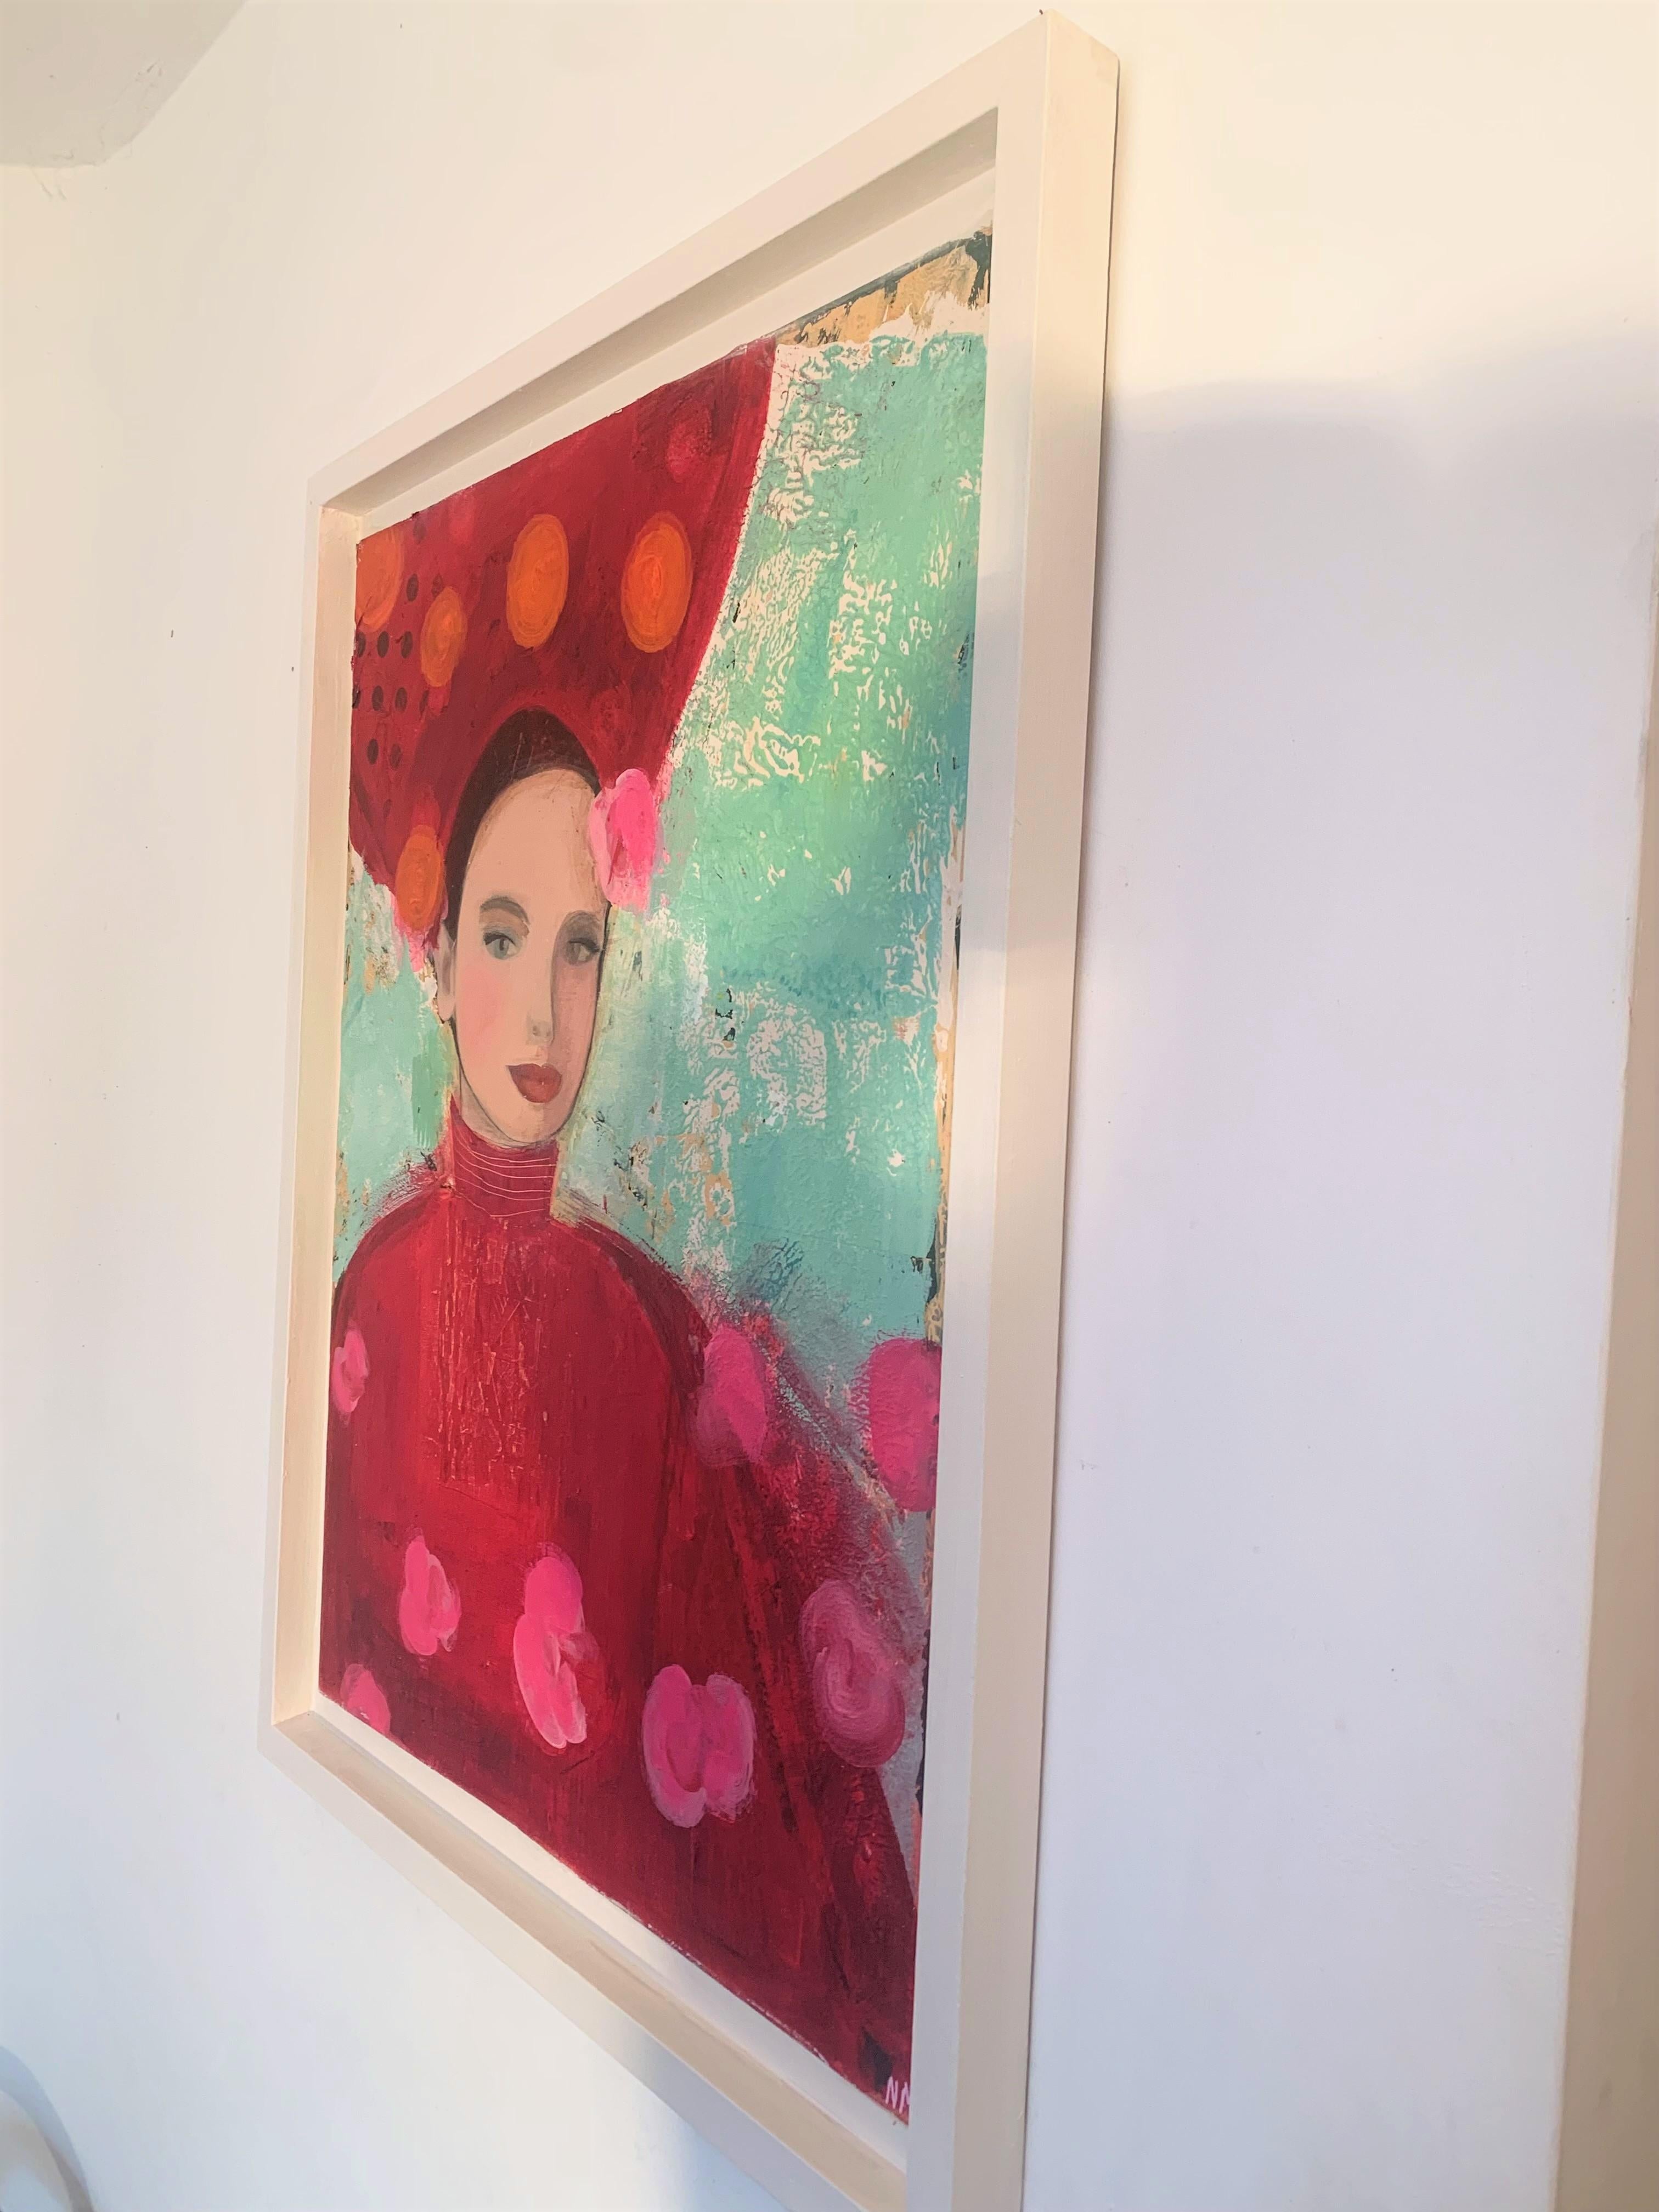 Framed Size: 70 x 88 cm
Unframed Size: 60 x 77 cm

Nicolle was born in Zimbabwe (Rhodesia as it was then) and grew up in Africa and then travelled the world for some years before settling in the Uk.

“My love of colour stems from my younger life in